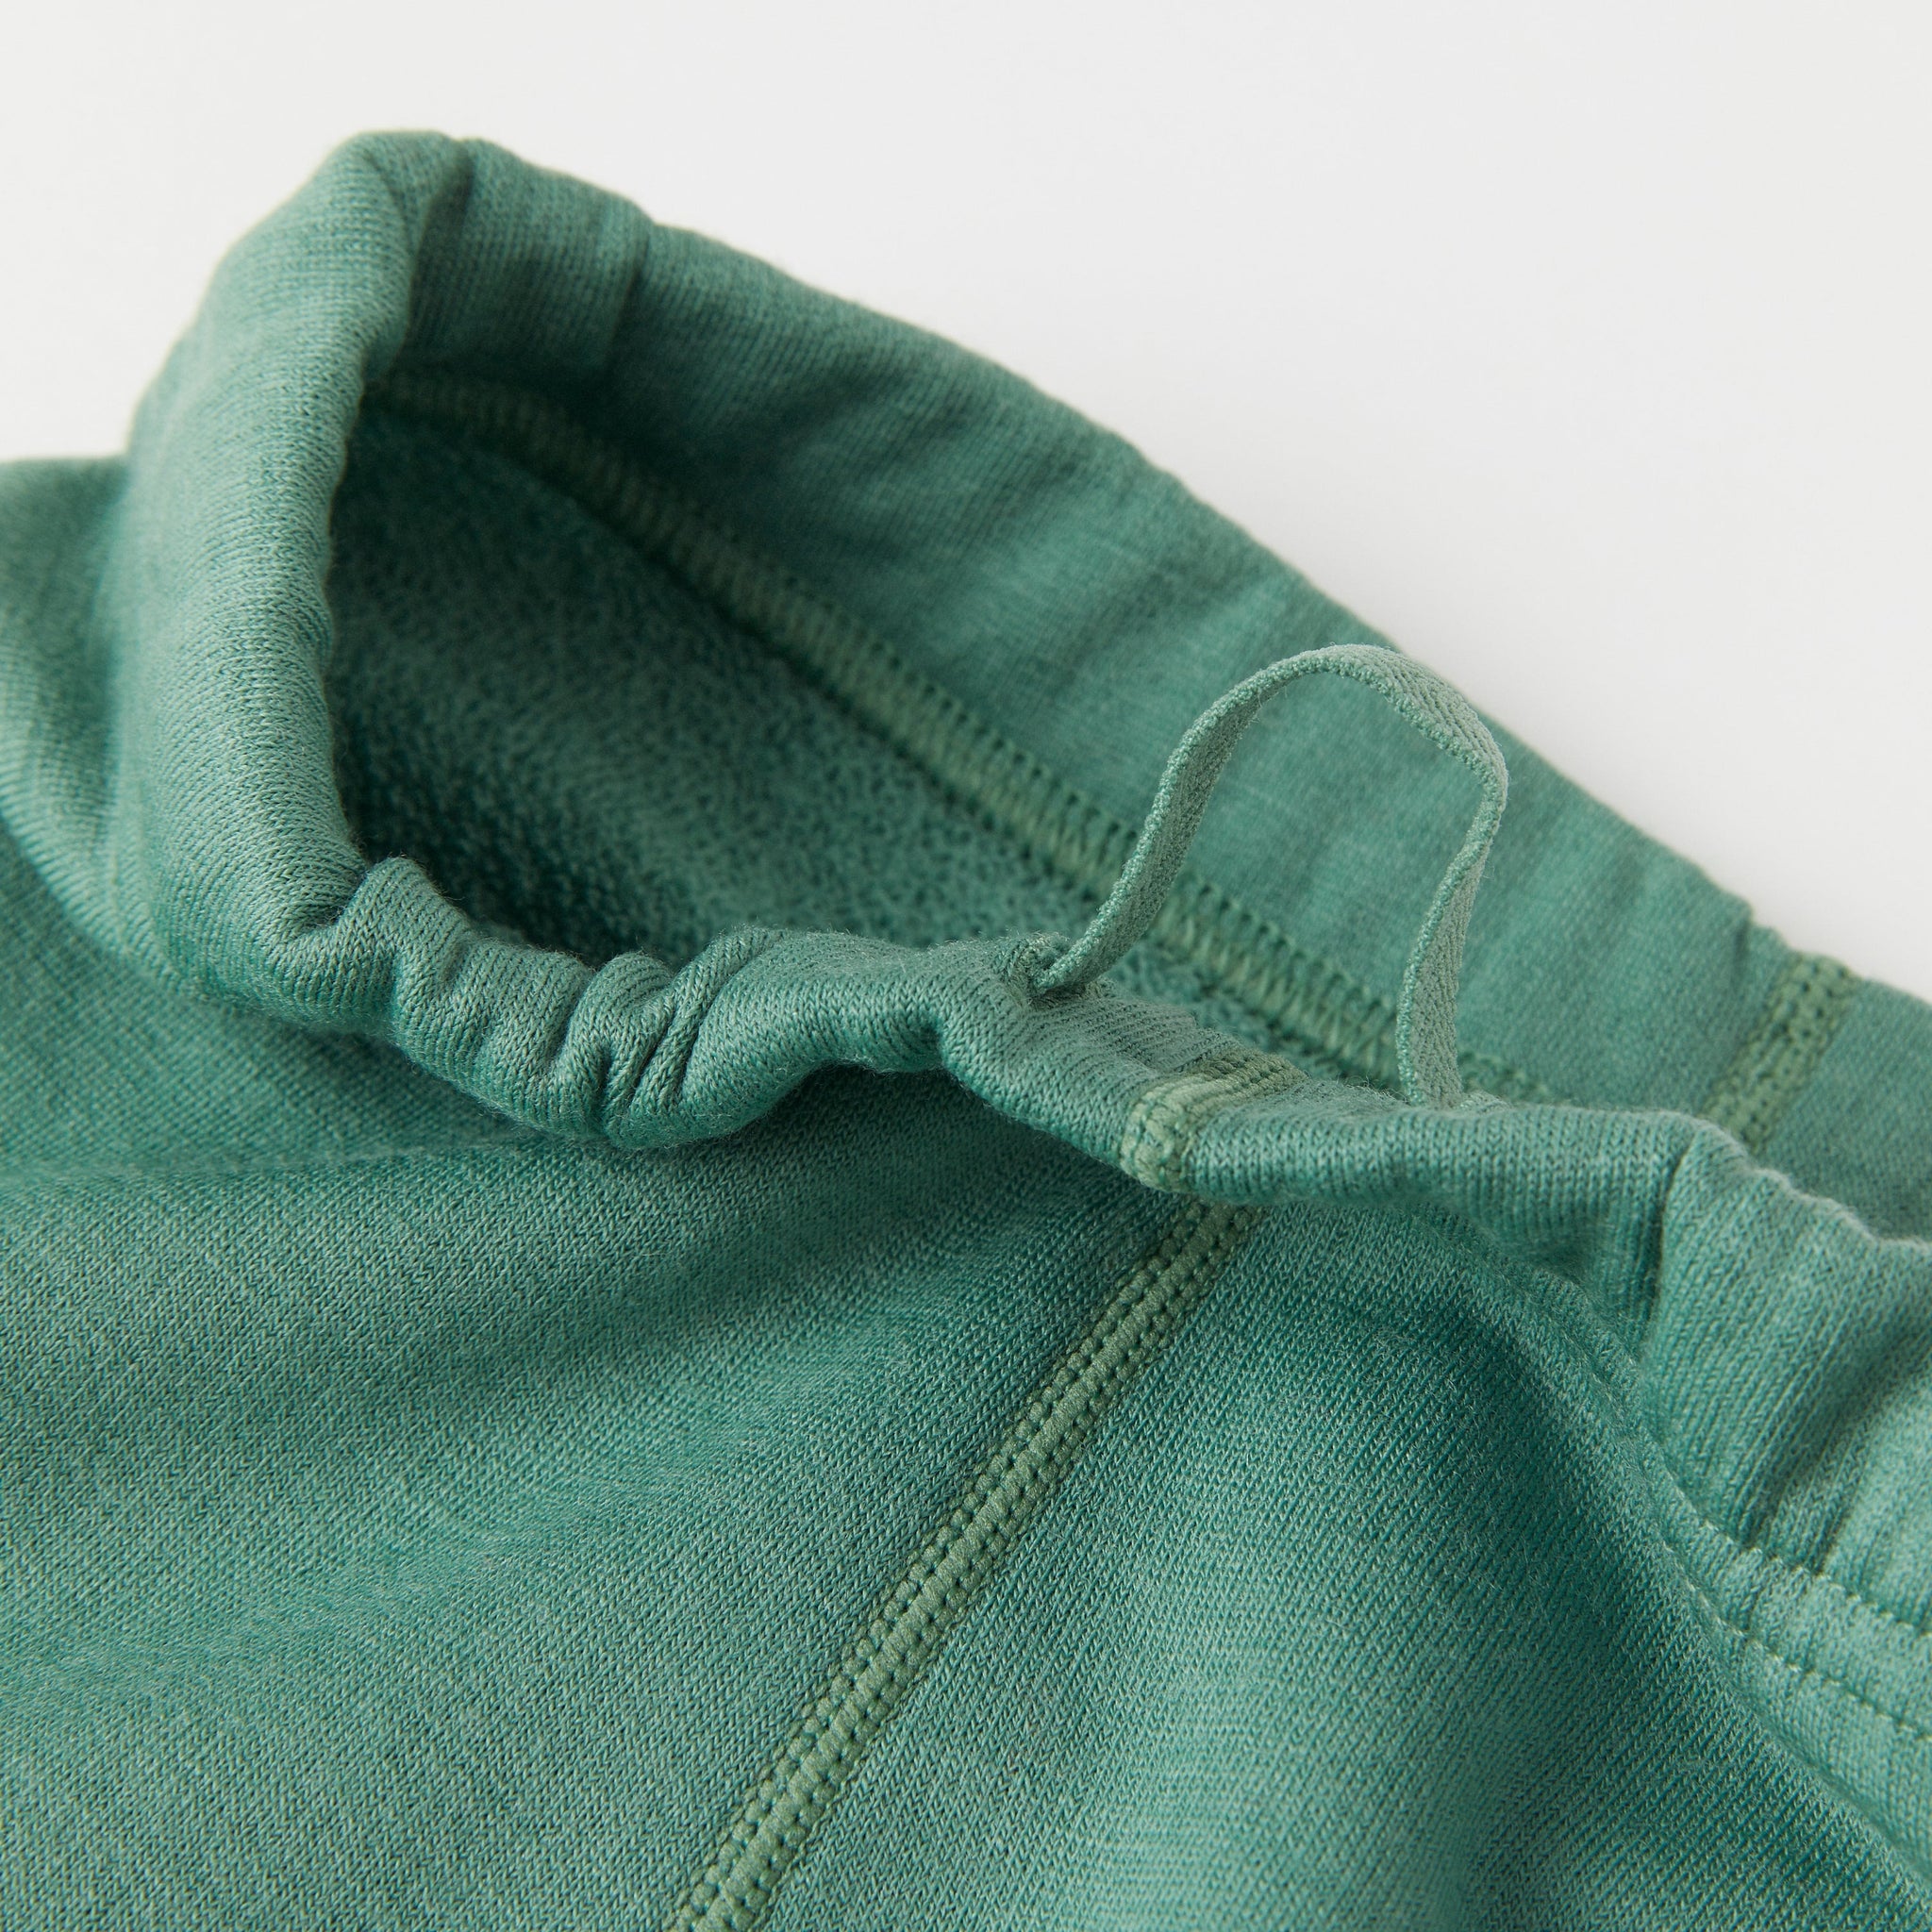 Green Merino Wool Kids Long Johns from the Polarn O. Pyret kidswear collection. Quality kids clothing made to last.